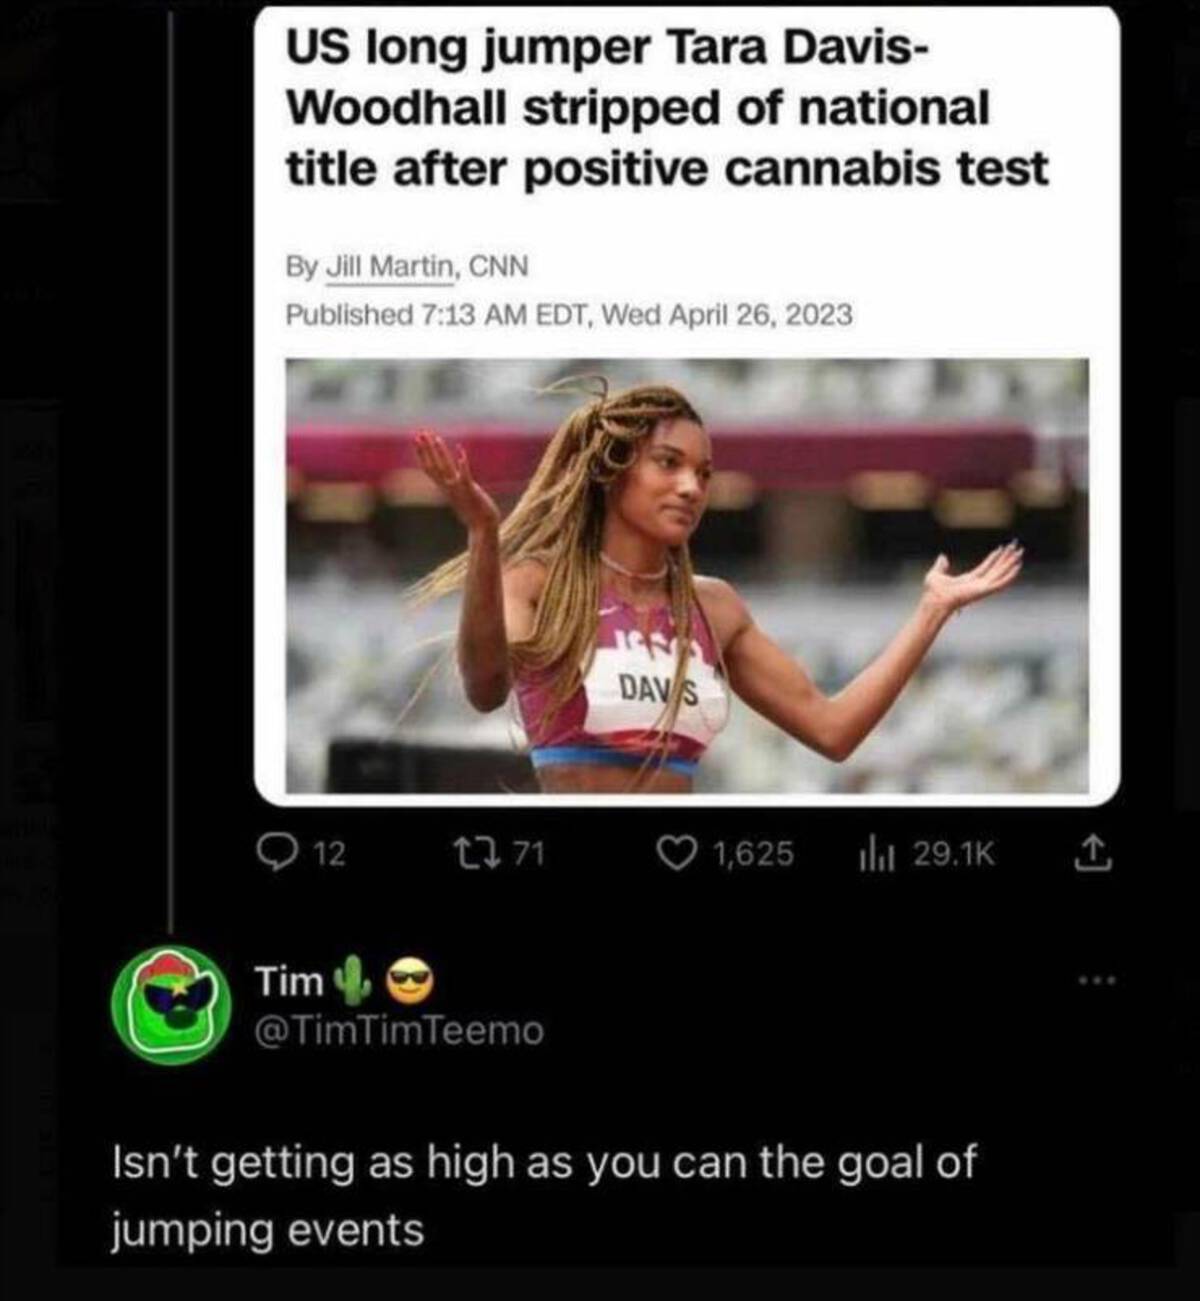 long jumpers - Us long jumper Tara Davis Woodhall stripped of national title after positive cannabis test By Jill Martin, Cnn Published Edt, Wed 1814 Dav S 12 13 71 1,625 ili A Tim, Isn't getting as high as you can the goal of jumping events